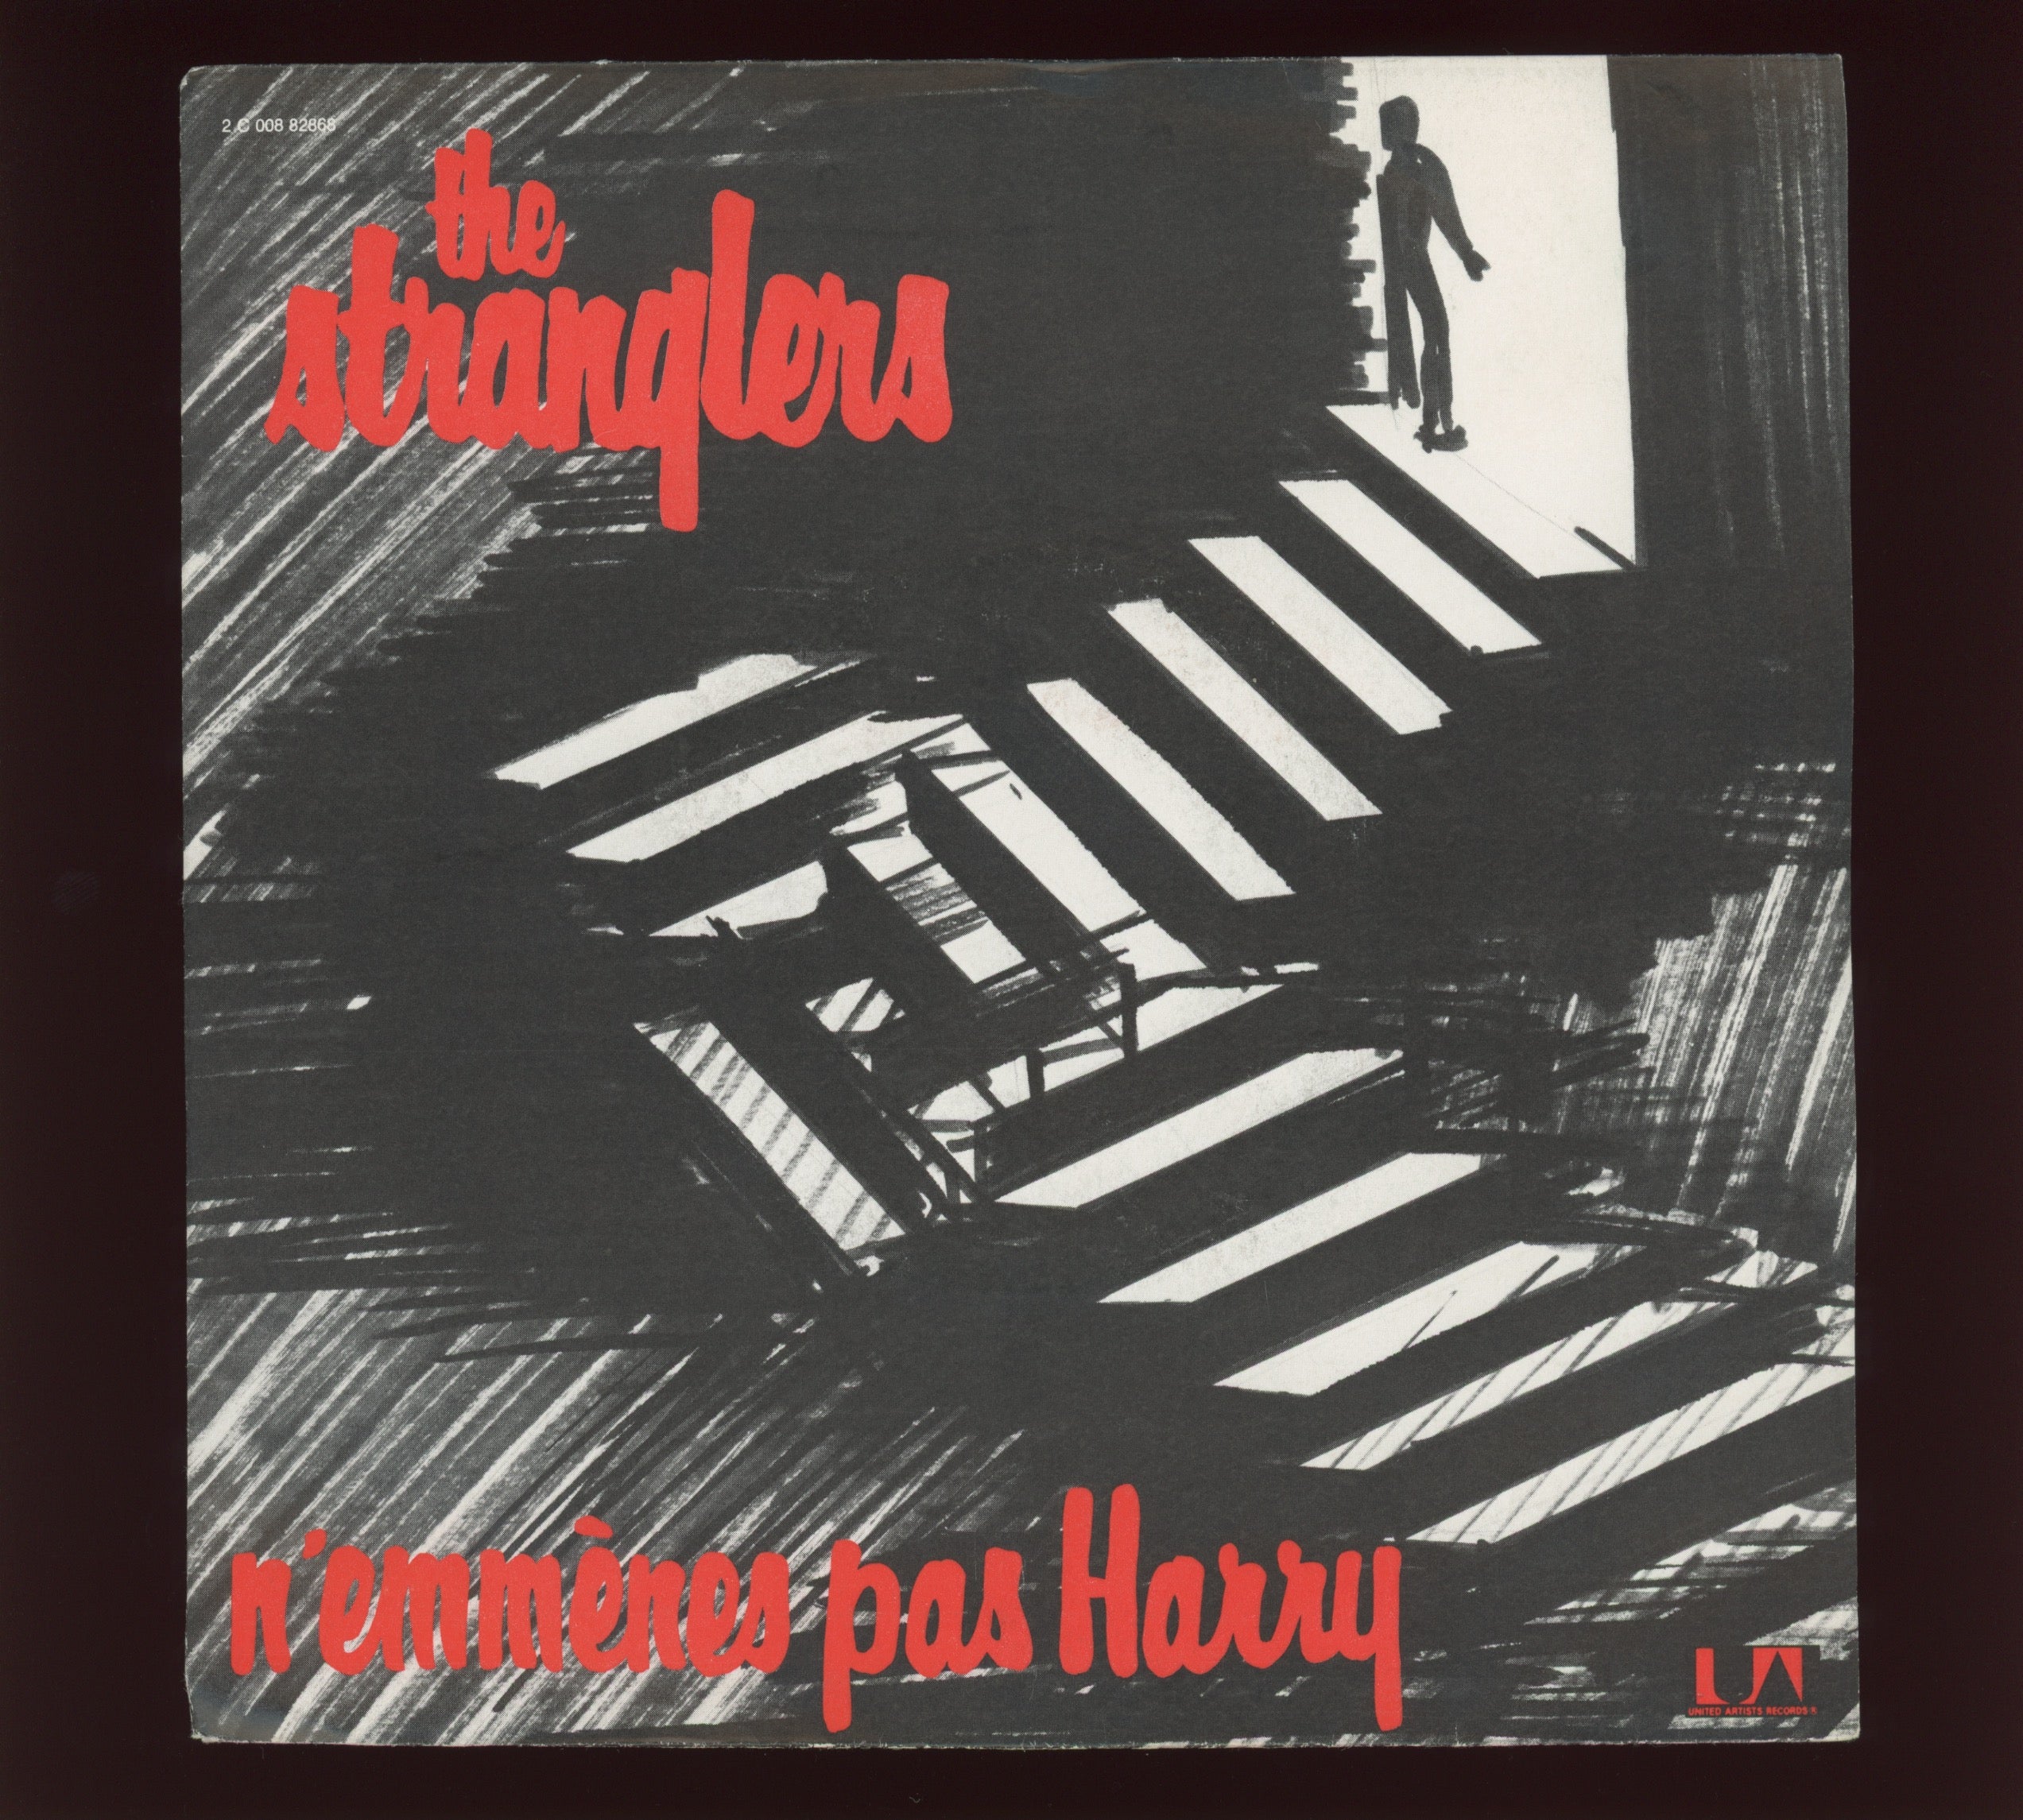 The Stranglers - N’emmènes Pas Harry on UA French Pressing